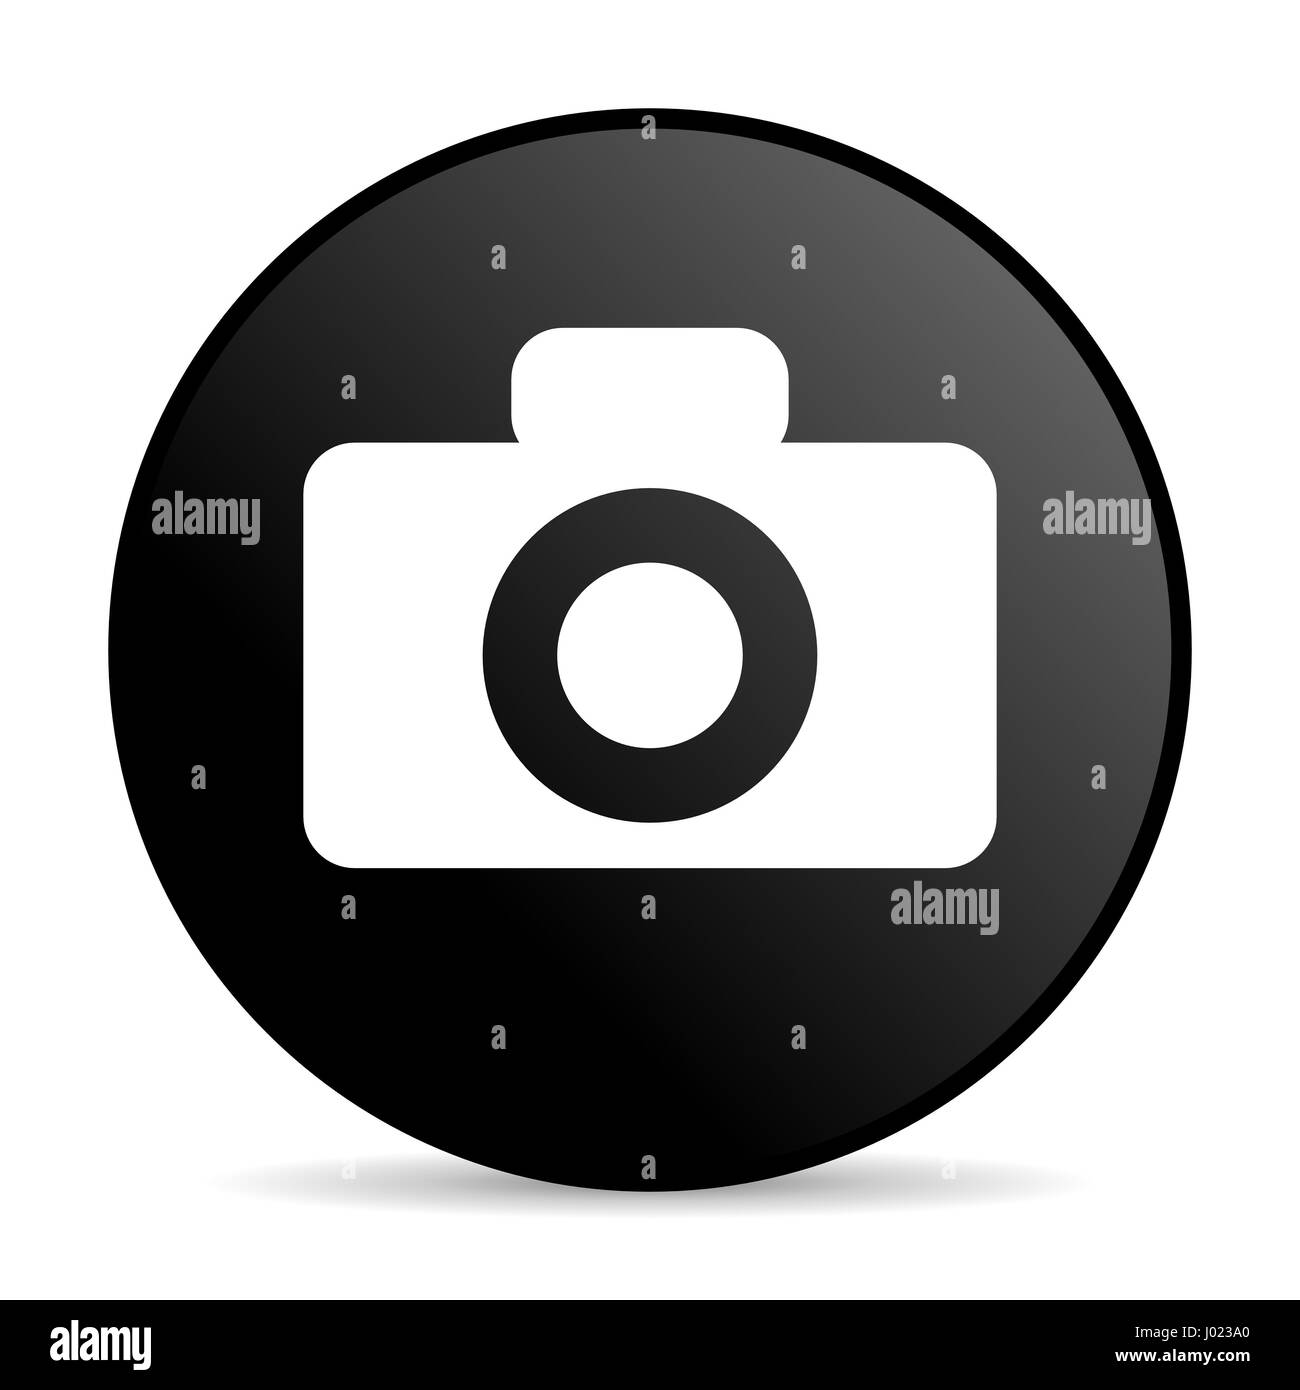 Picto web Black and White Stock Photos & Images - Alamy